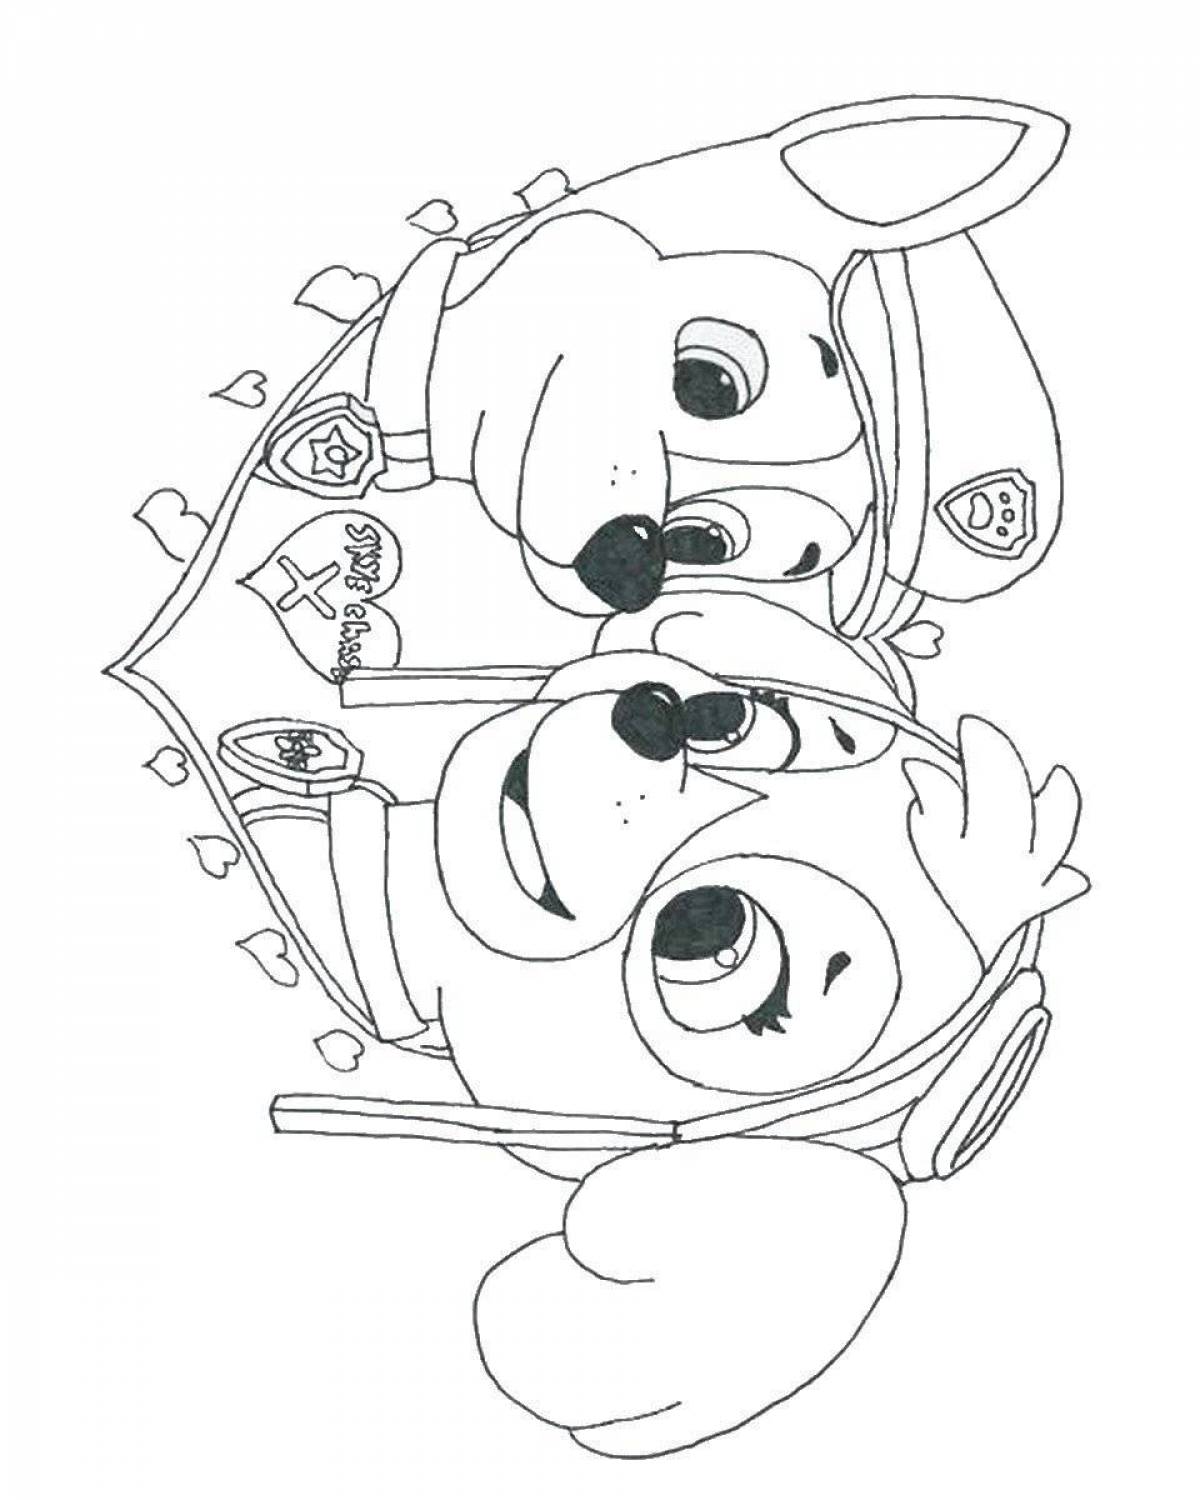 Paw Patrol glowing sky coloring page